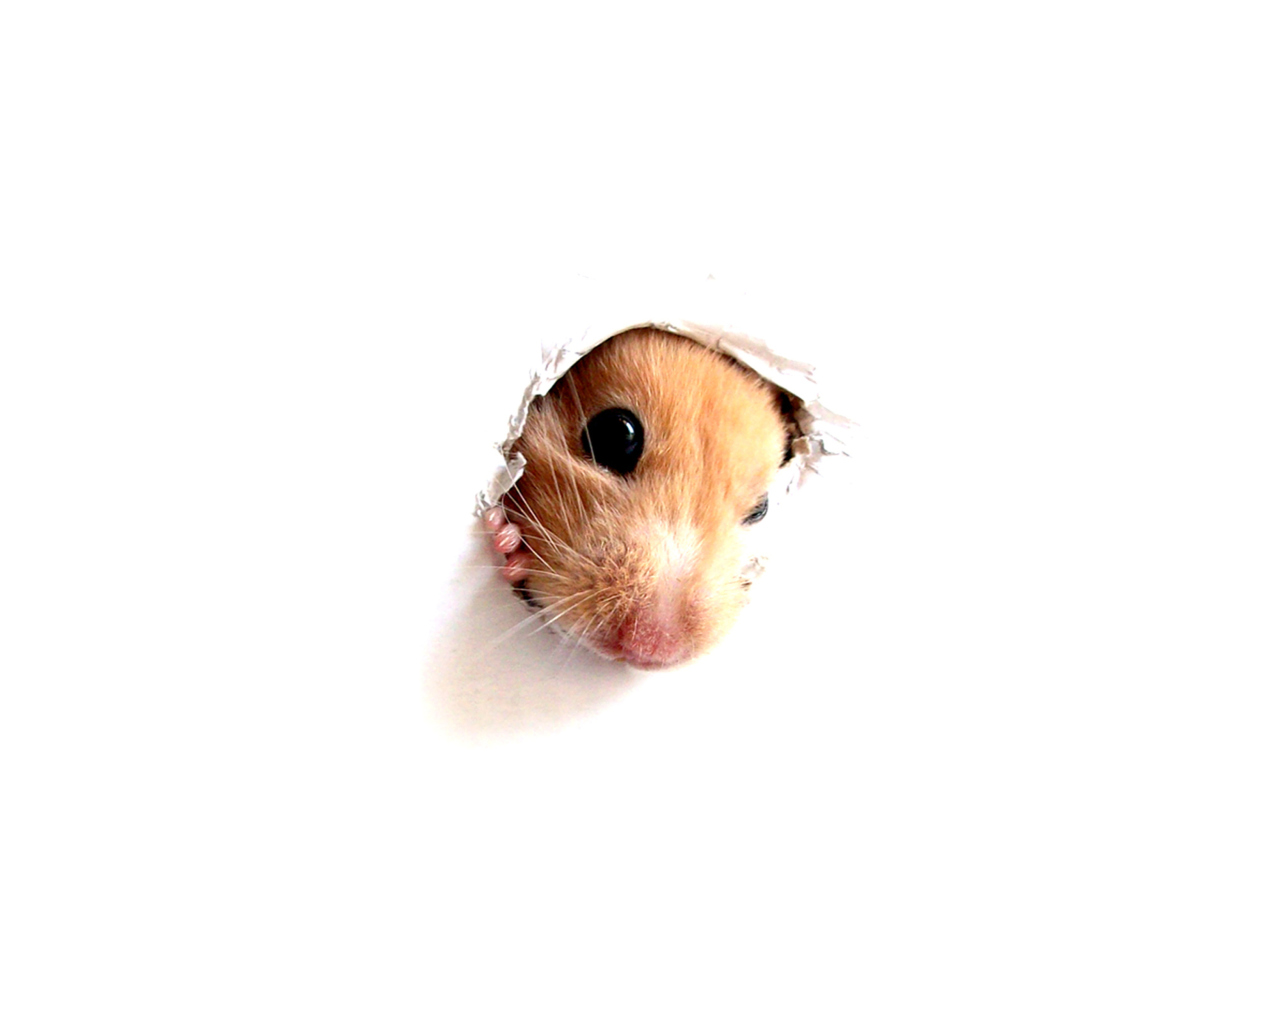 Hamster In Hole On Your Screen screenshot #1 1280x1024